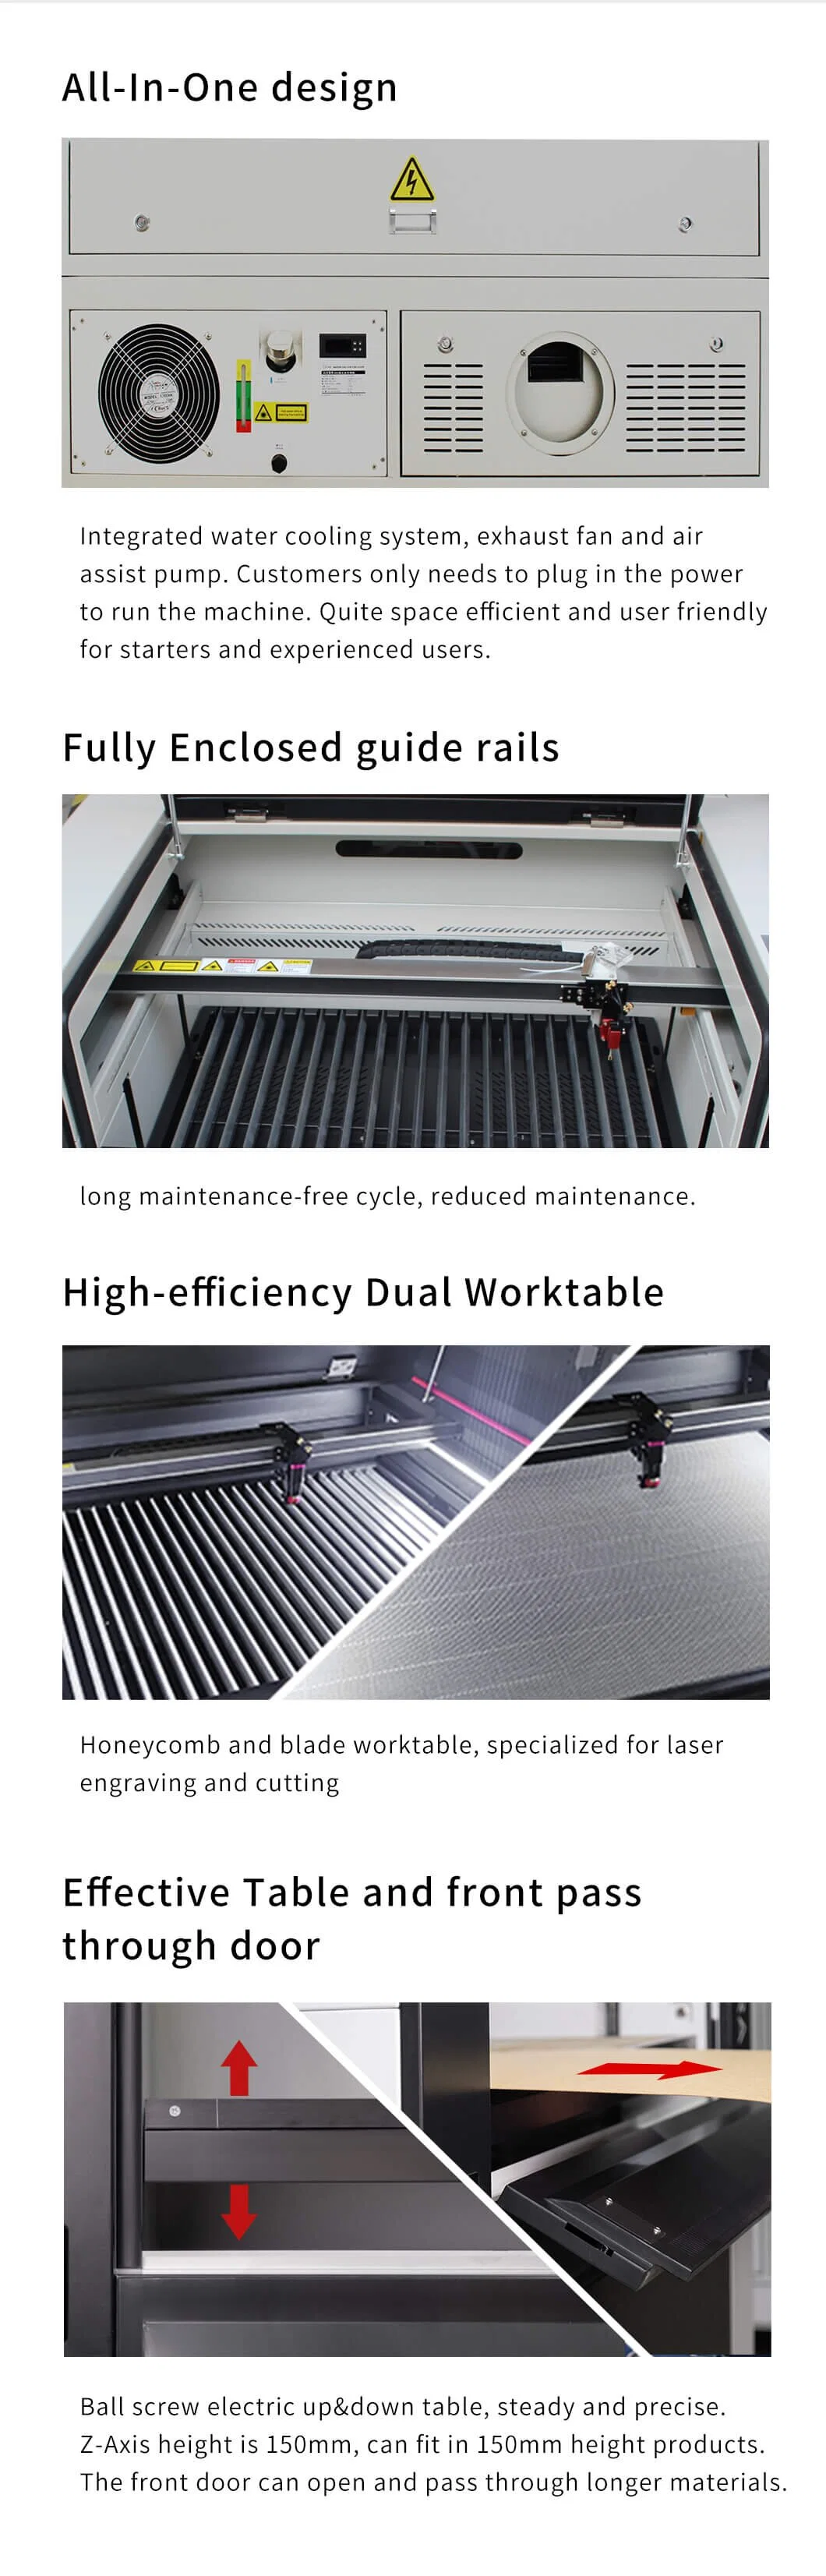 Fast Speed Mira 7 7045 60W/80W Autofocus WiFi C02 Laser Cutter for Acrylic Crytal Leather MDF with 1200mm/S Engraving Speed